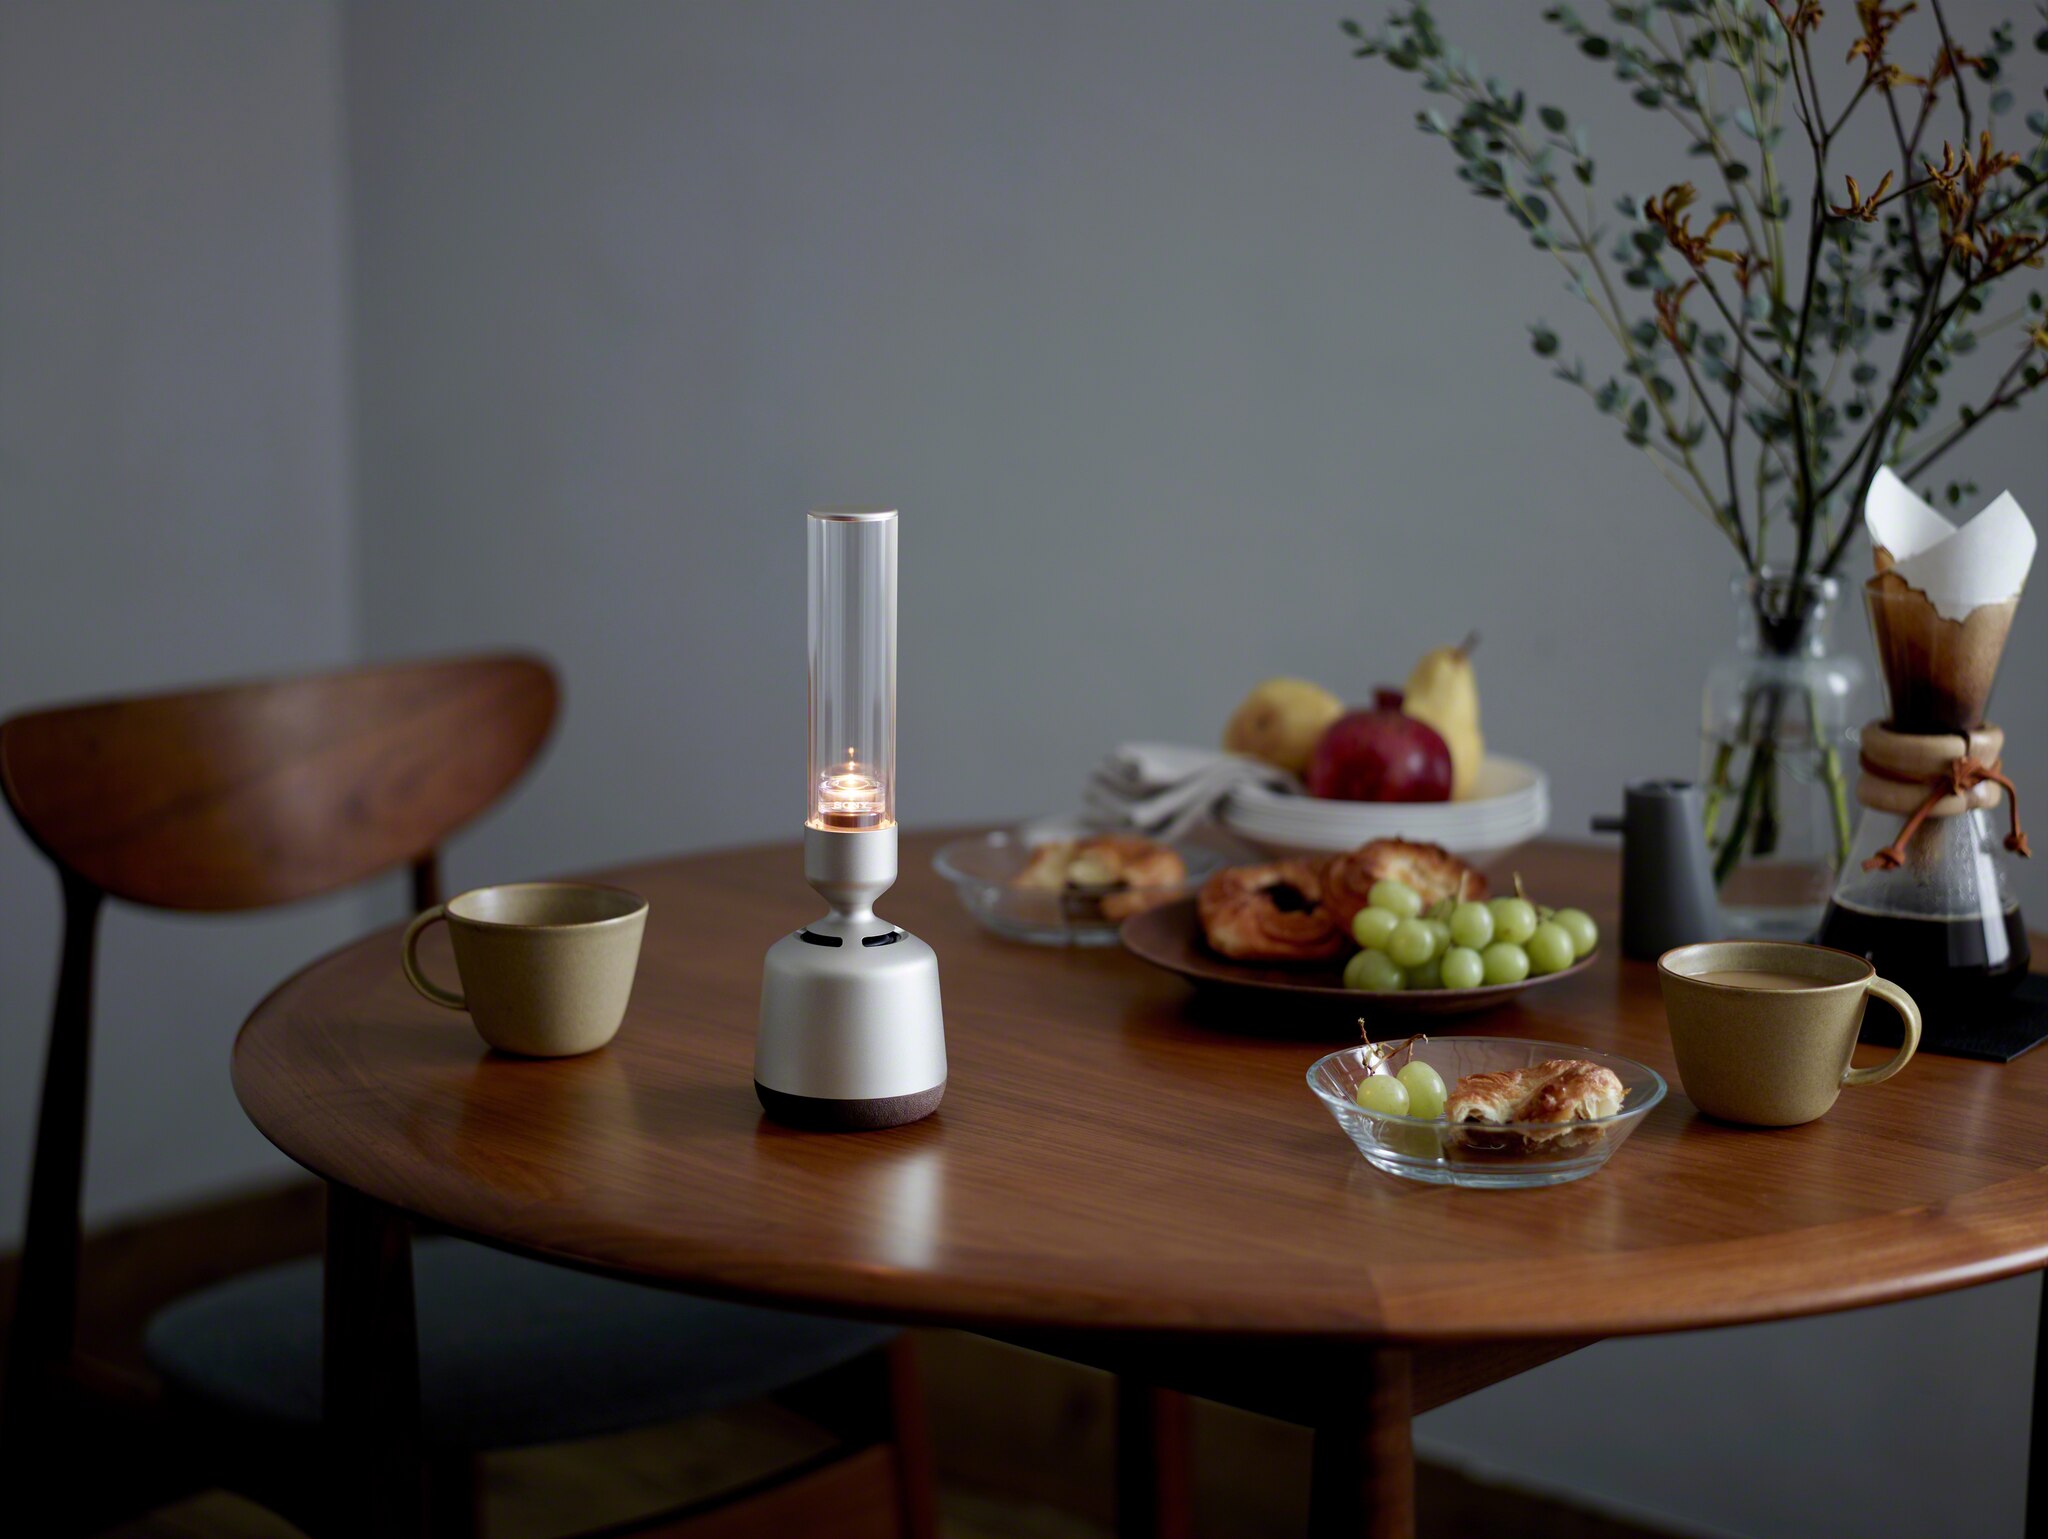 CES 2019: Sony's new Glass Sound Speaker looks like a candle - Domus